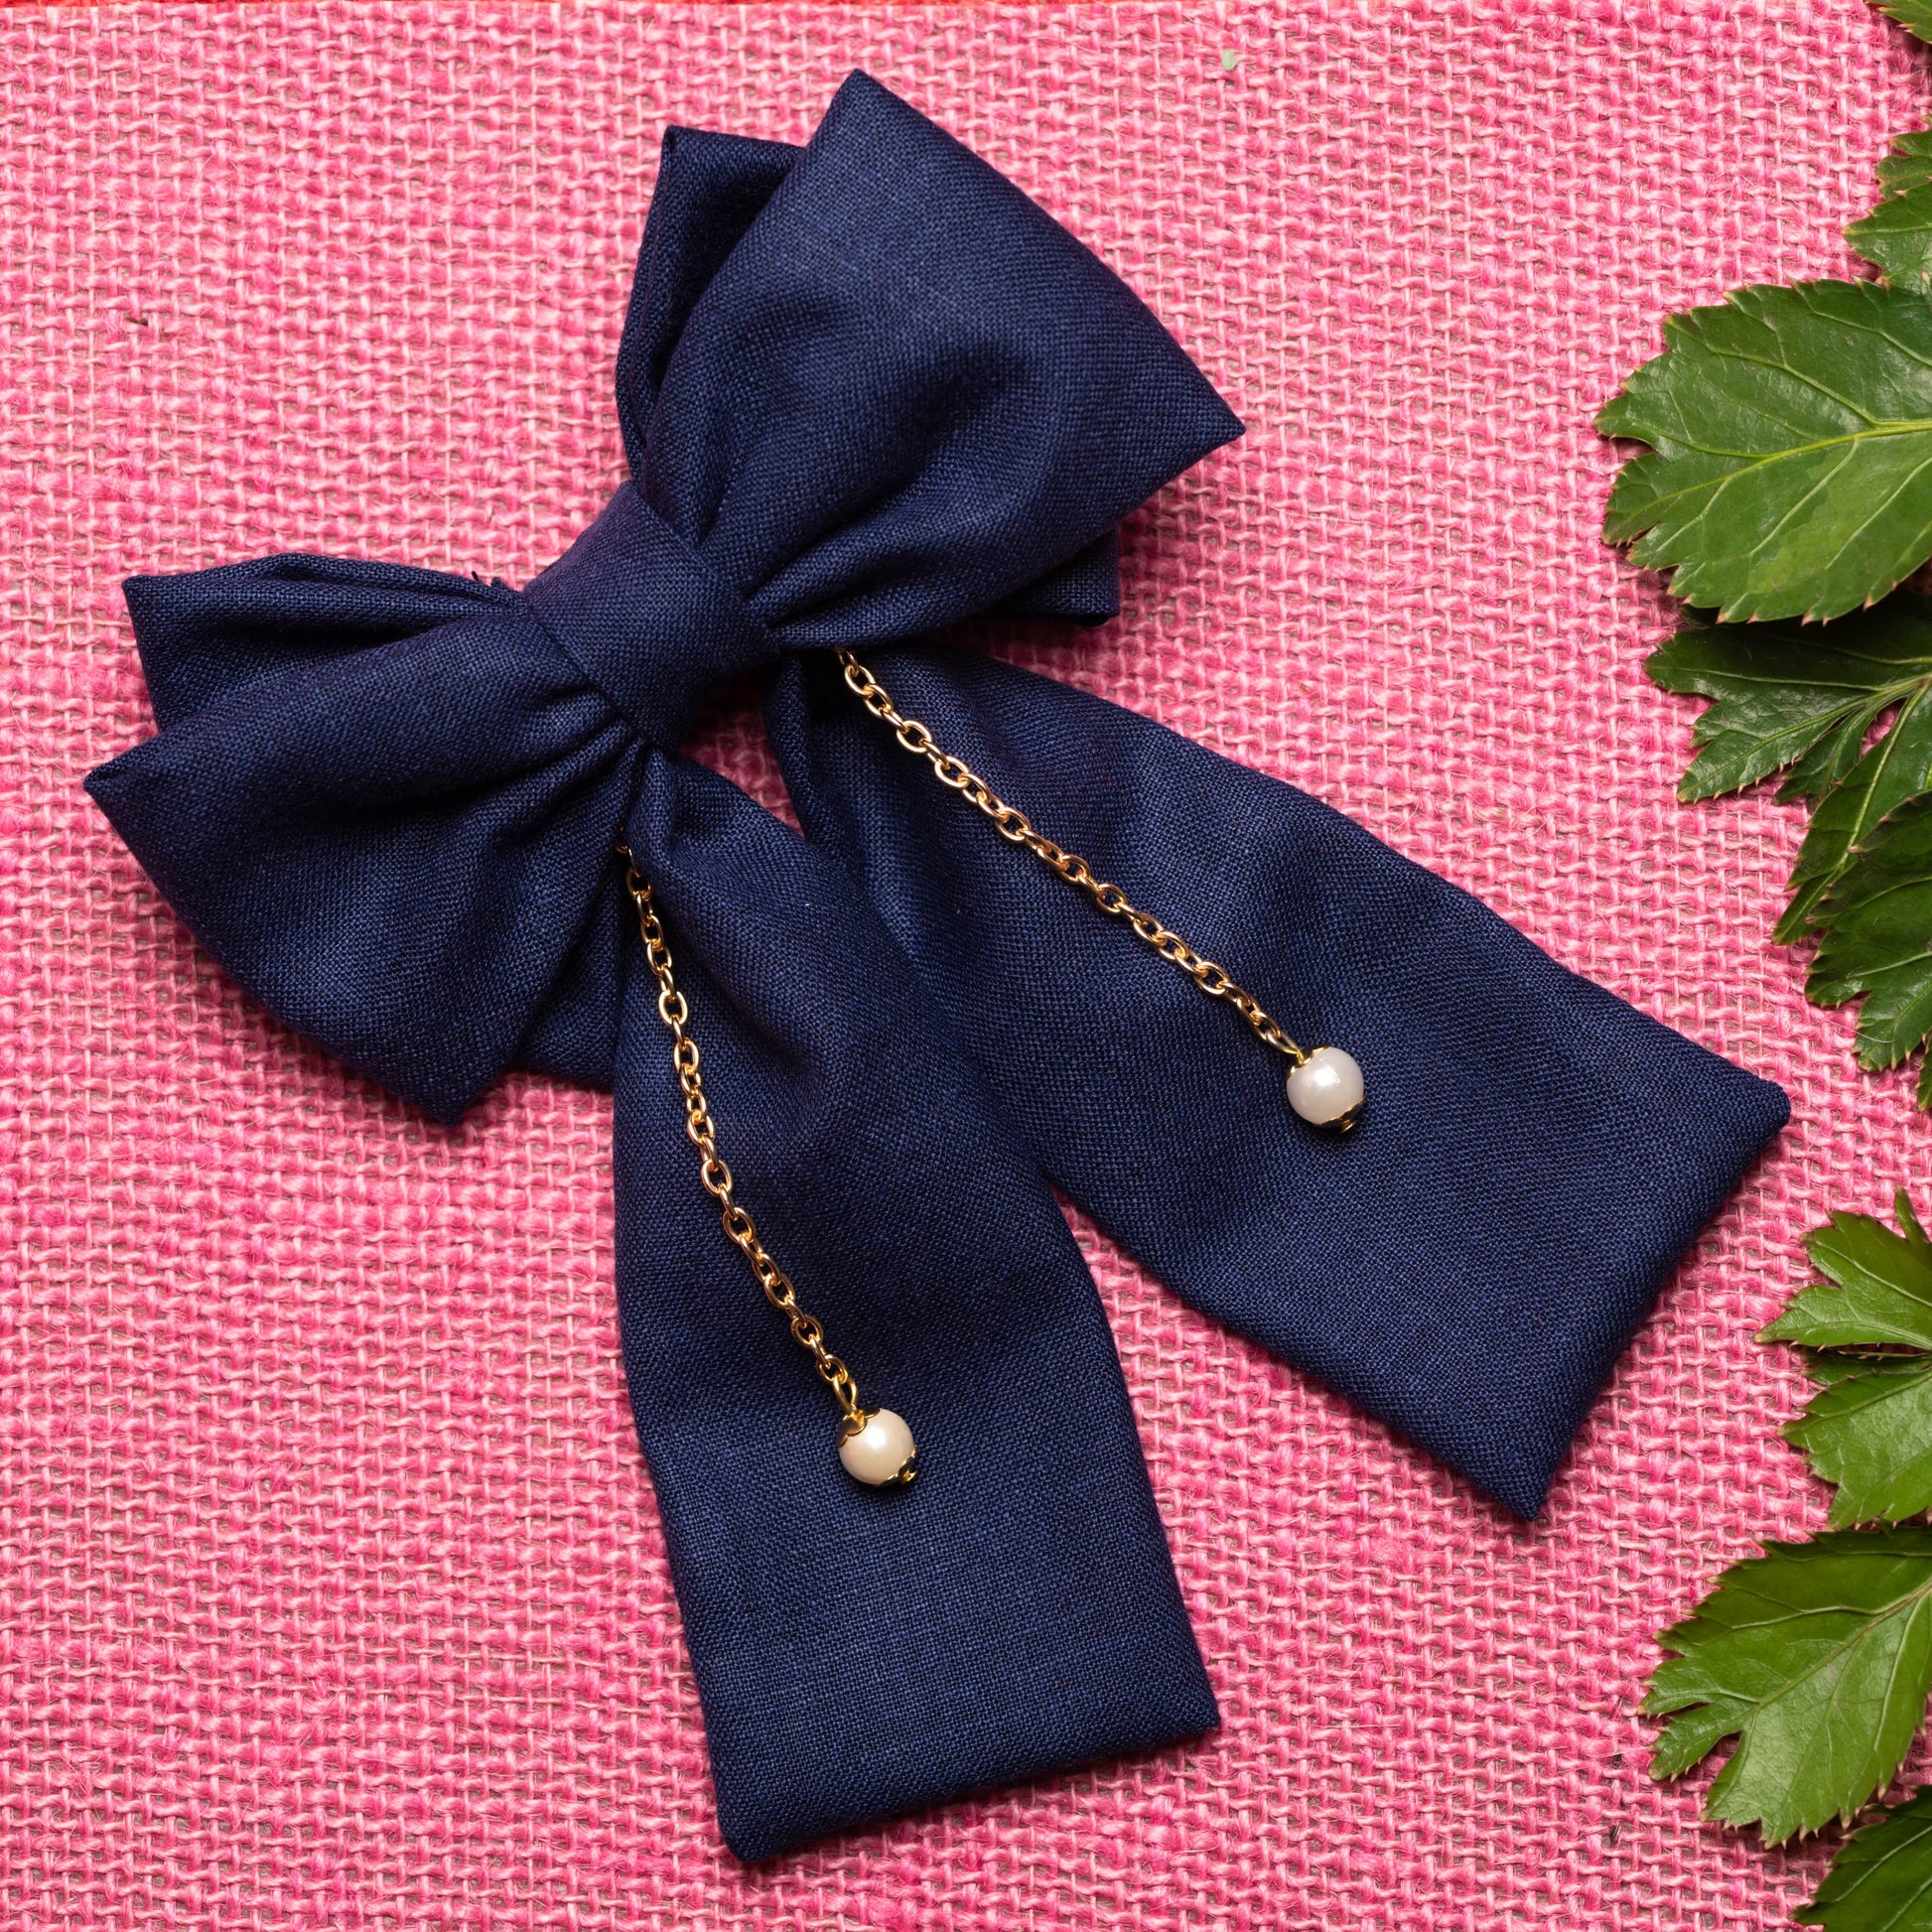 Dual Bow (Large) With Chain and Pearl Detailing on Alligator Clip - Navy Blue